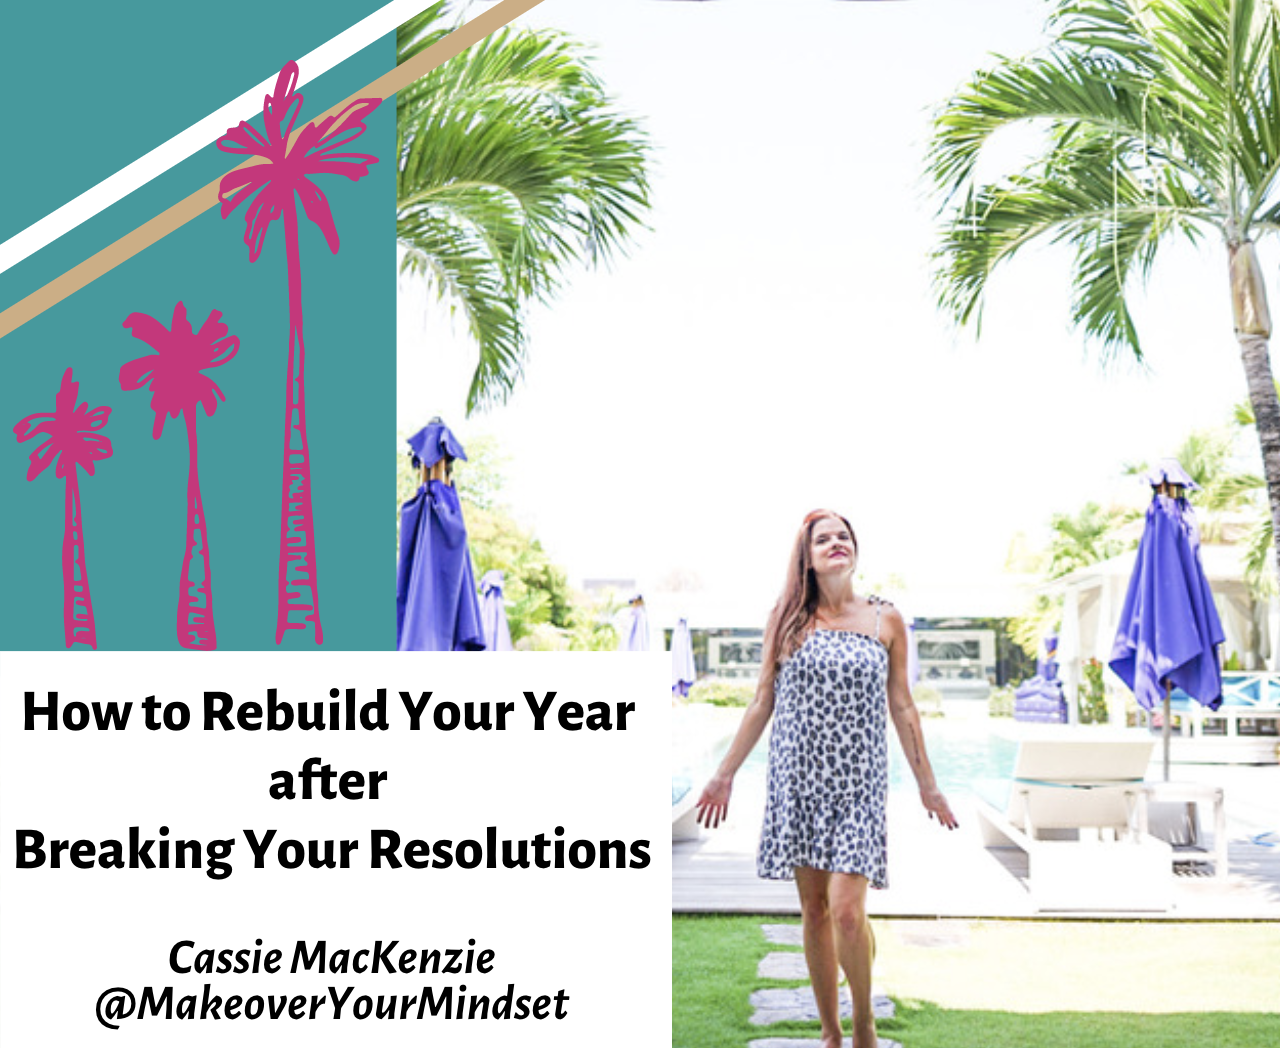 How to Rebuild Your Year After Breaking Your Resolutions with Cassie MacKenzie